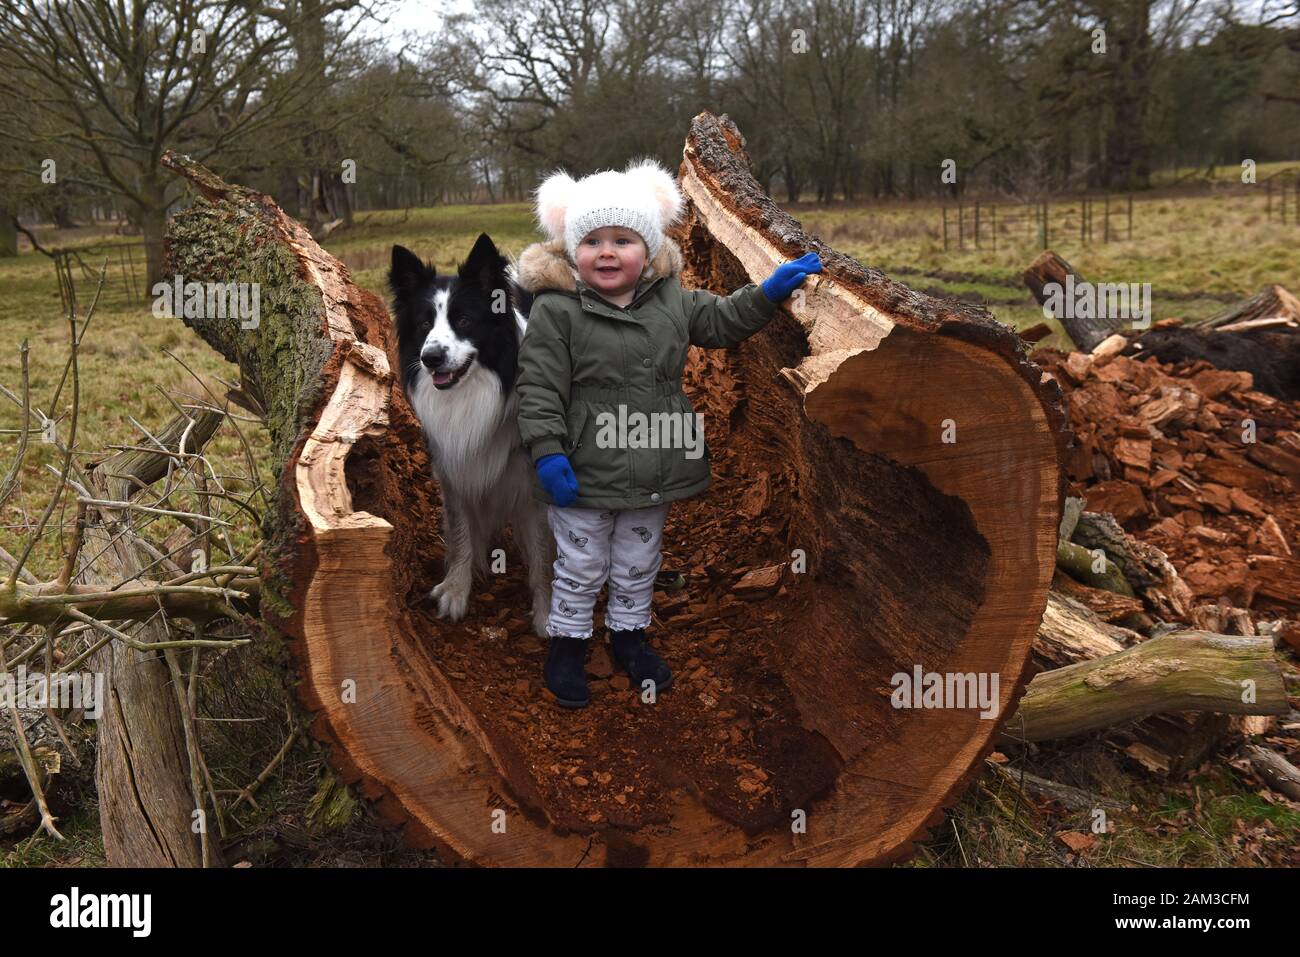 Border Collie dog and young child on rotten fallen oak tree Britain Uk Stock Photo